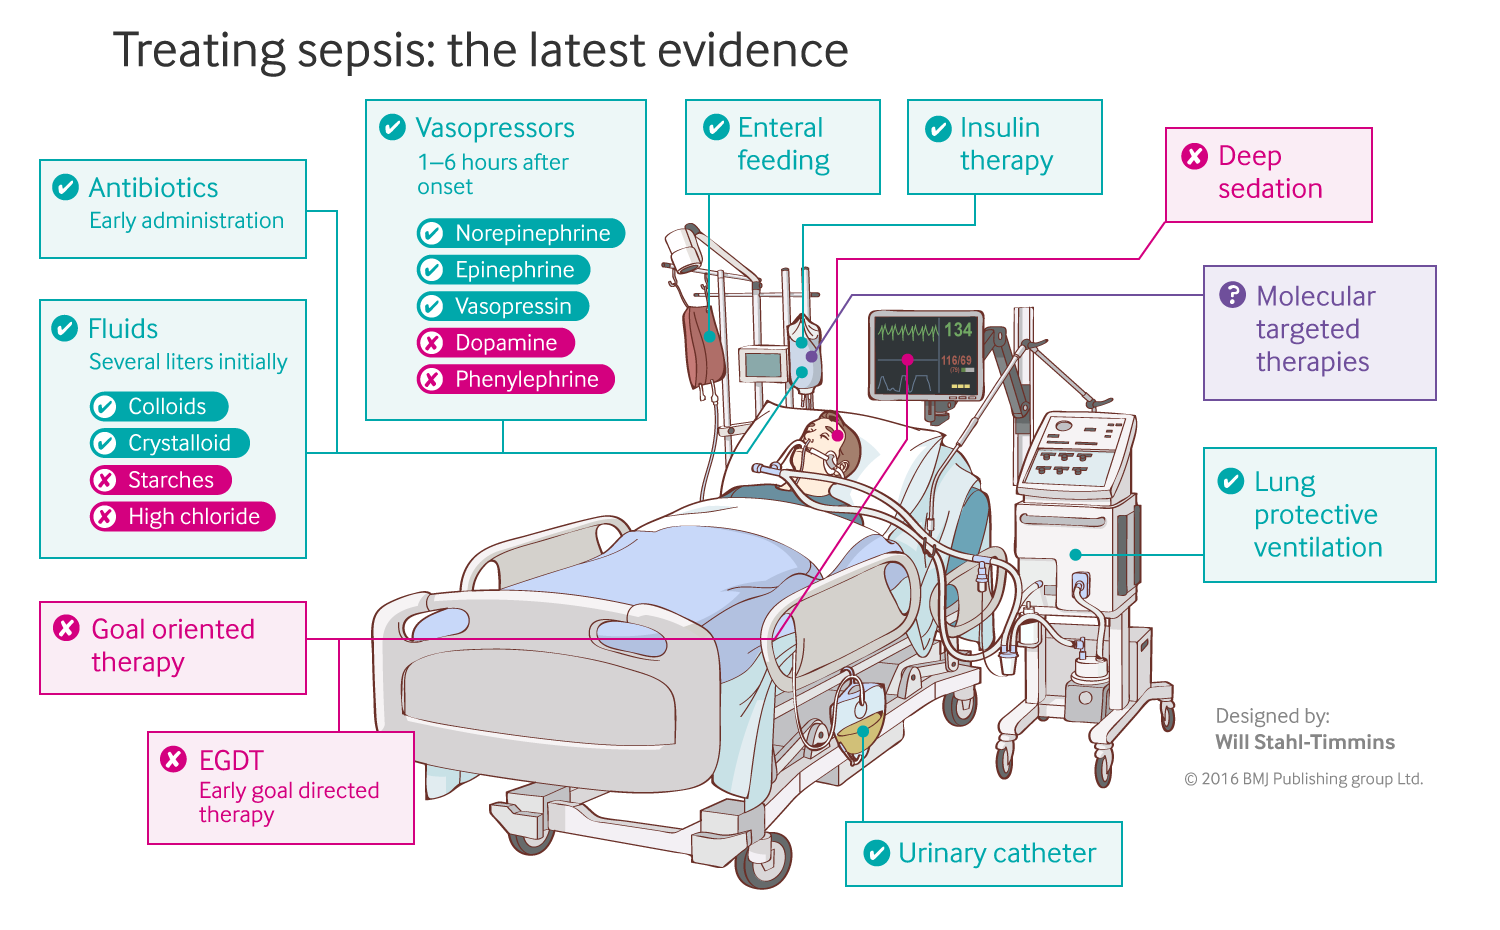 image showing screenshot of interactive graphic, showing a man in an intensive care unit with ventilator, feeding tube, IV drip and urinary catheter, and text boxes explaining these treatments